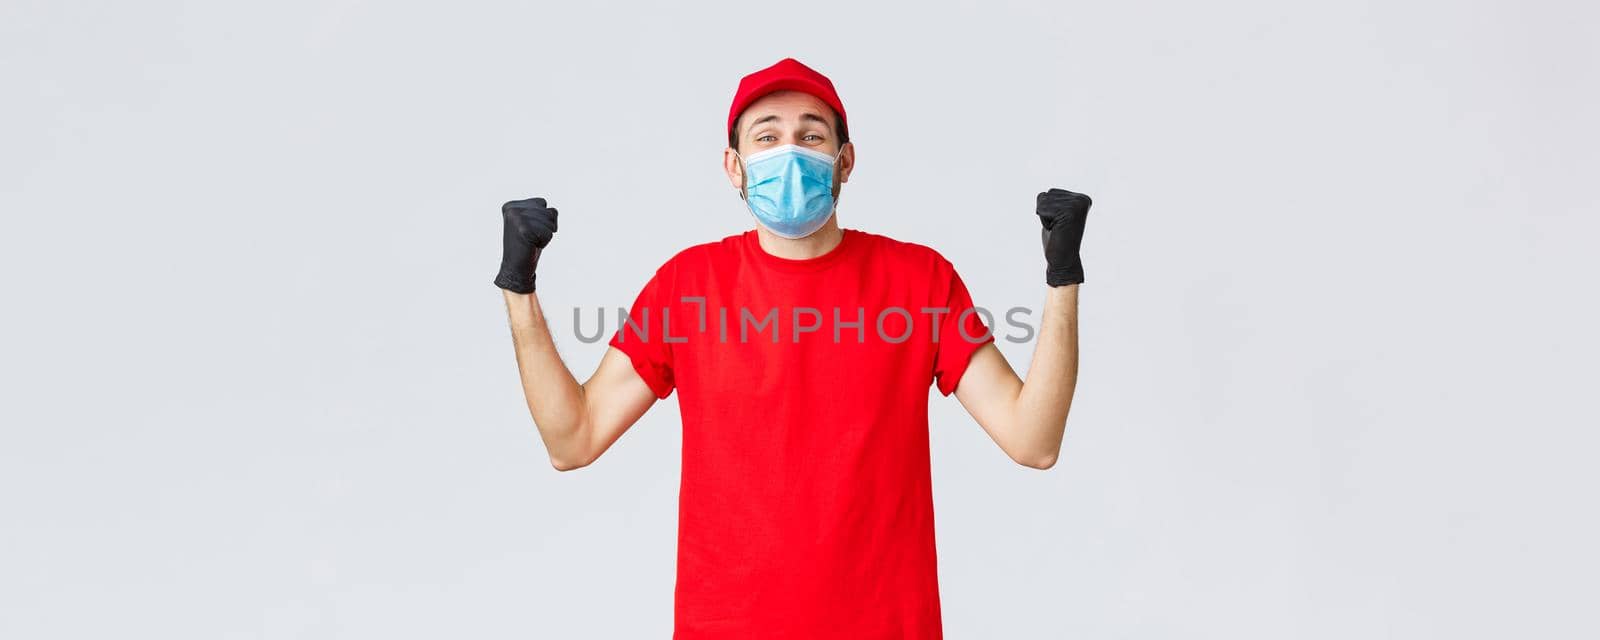 Covid-19, self-quarantine, online shopping and shipping concept. Excited delivery man feel rejoice and happiness, fist pump in celebration, success, achieve goal, wear medical mask and uniform cap.